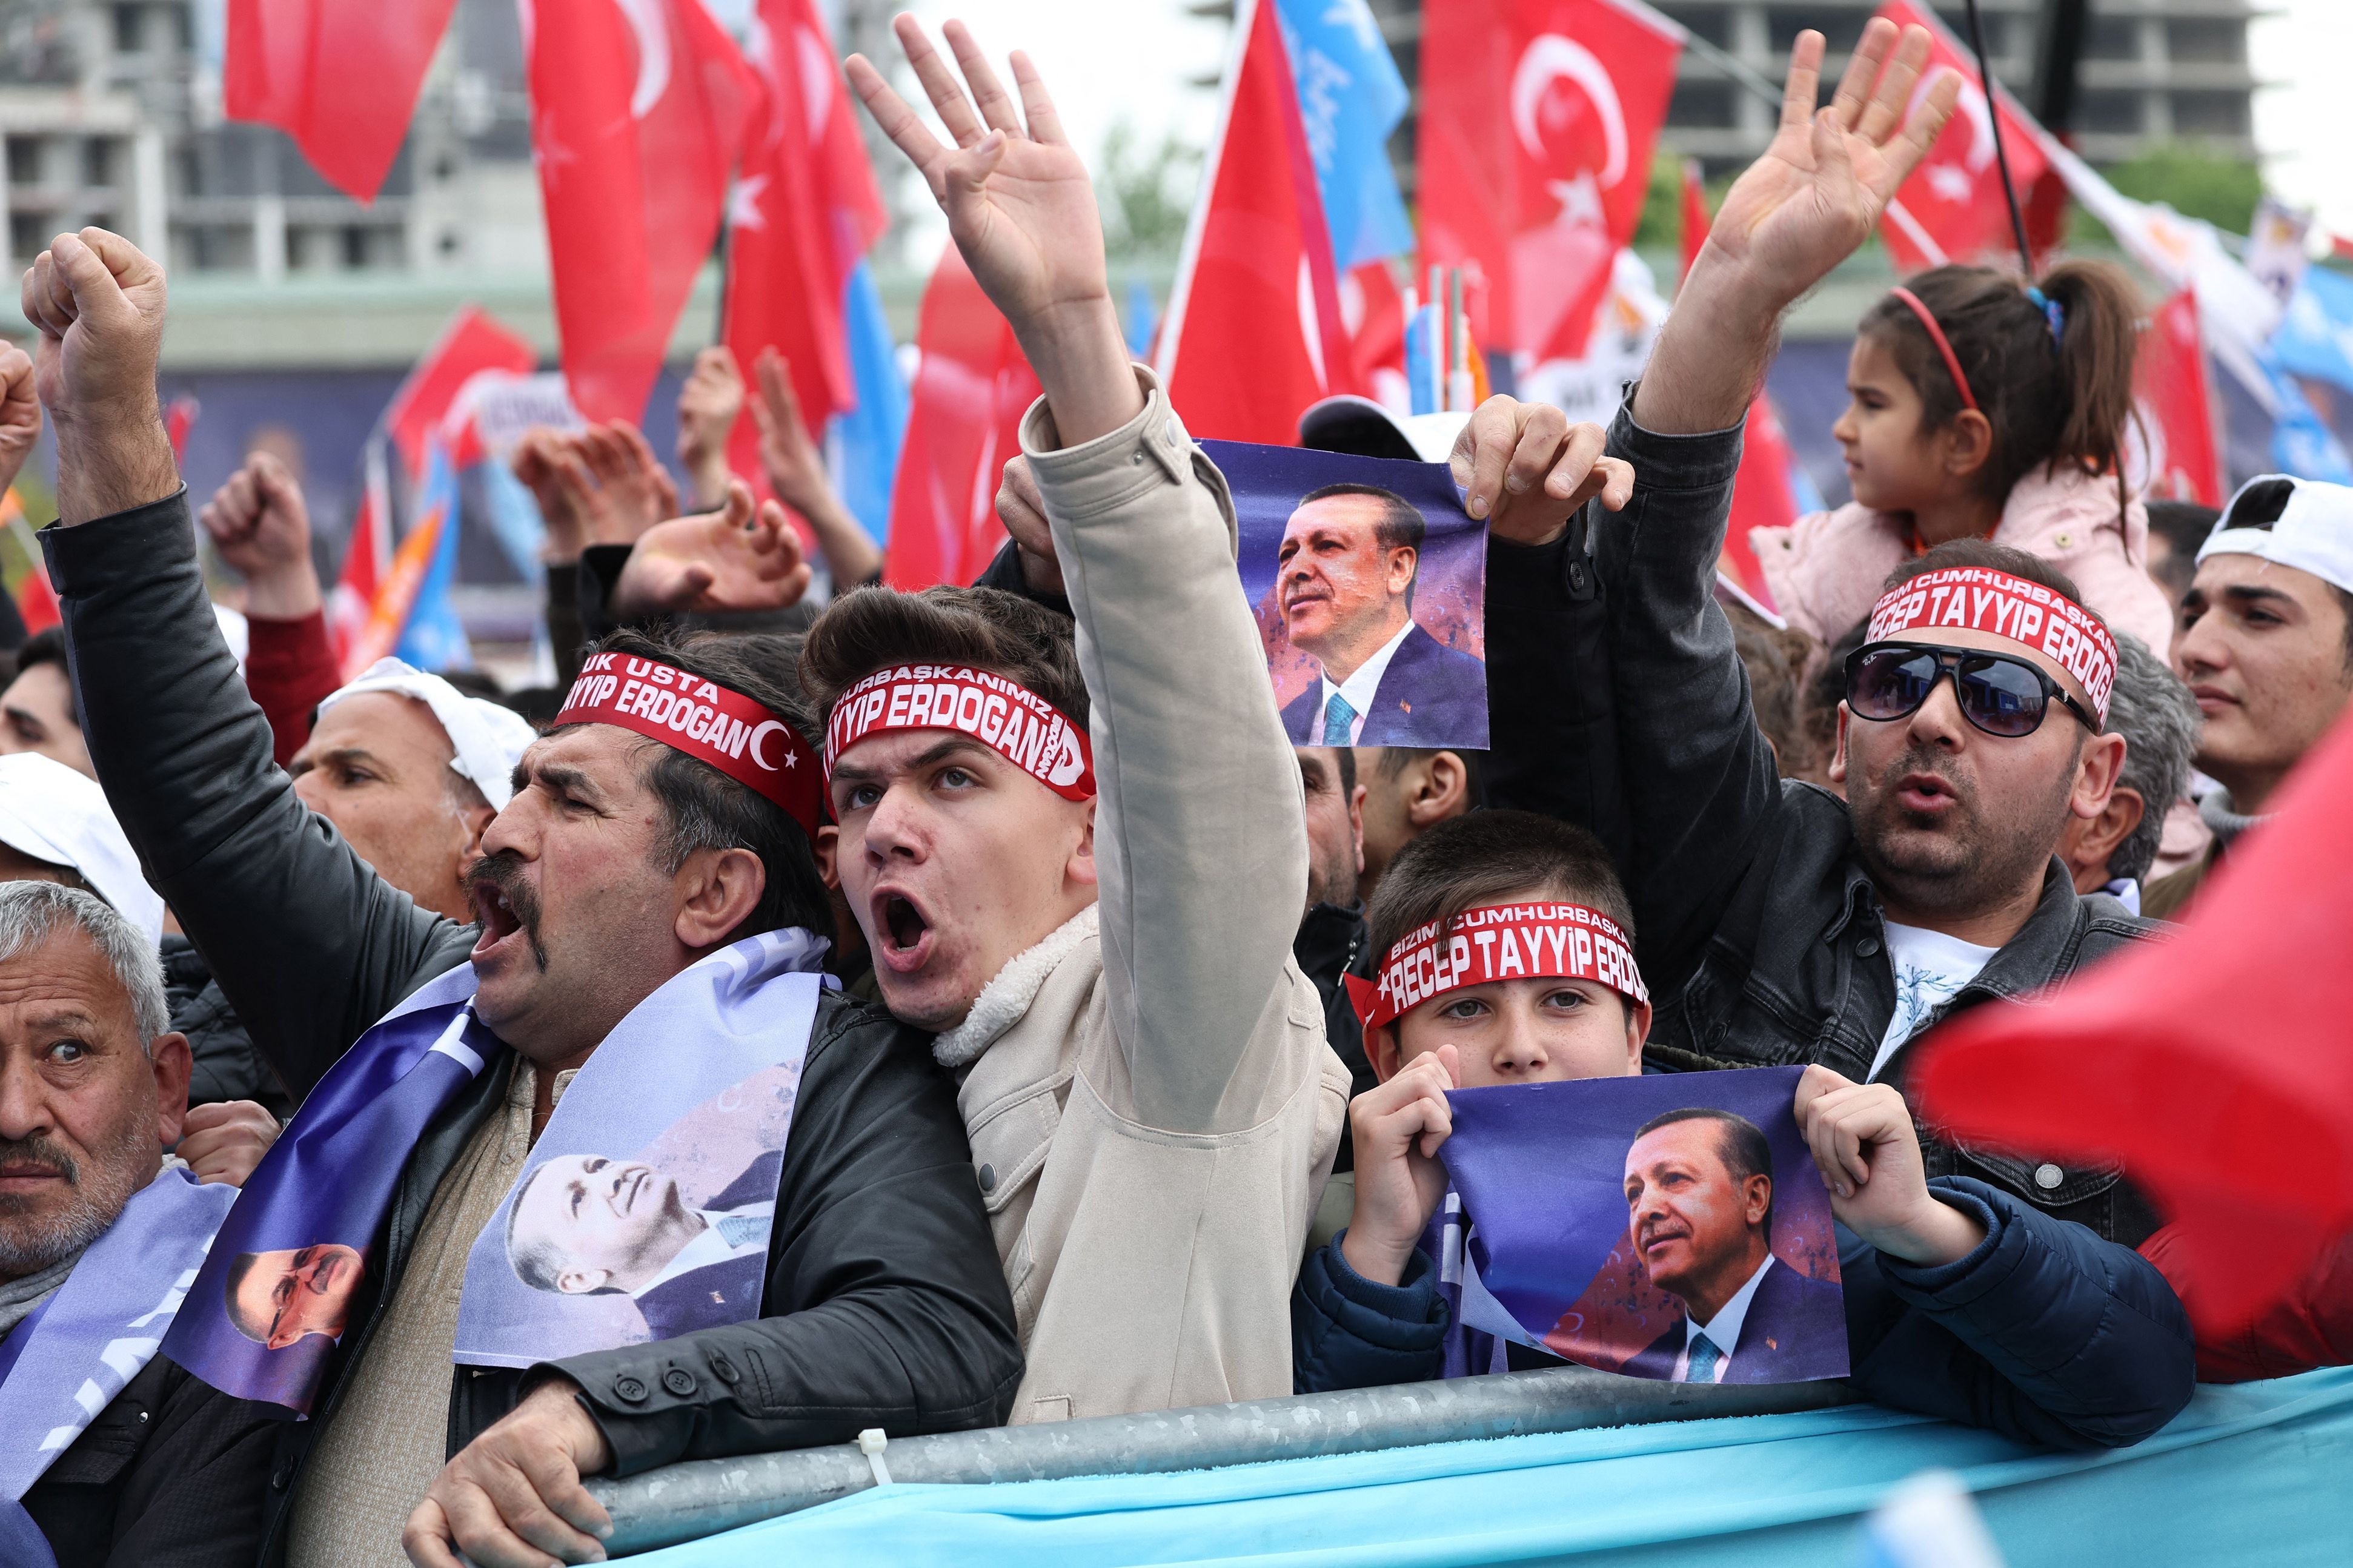 Supporters of President Erdogan during a campaign rally in Ankara last week